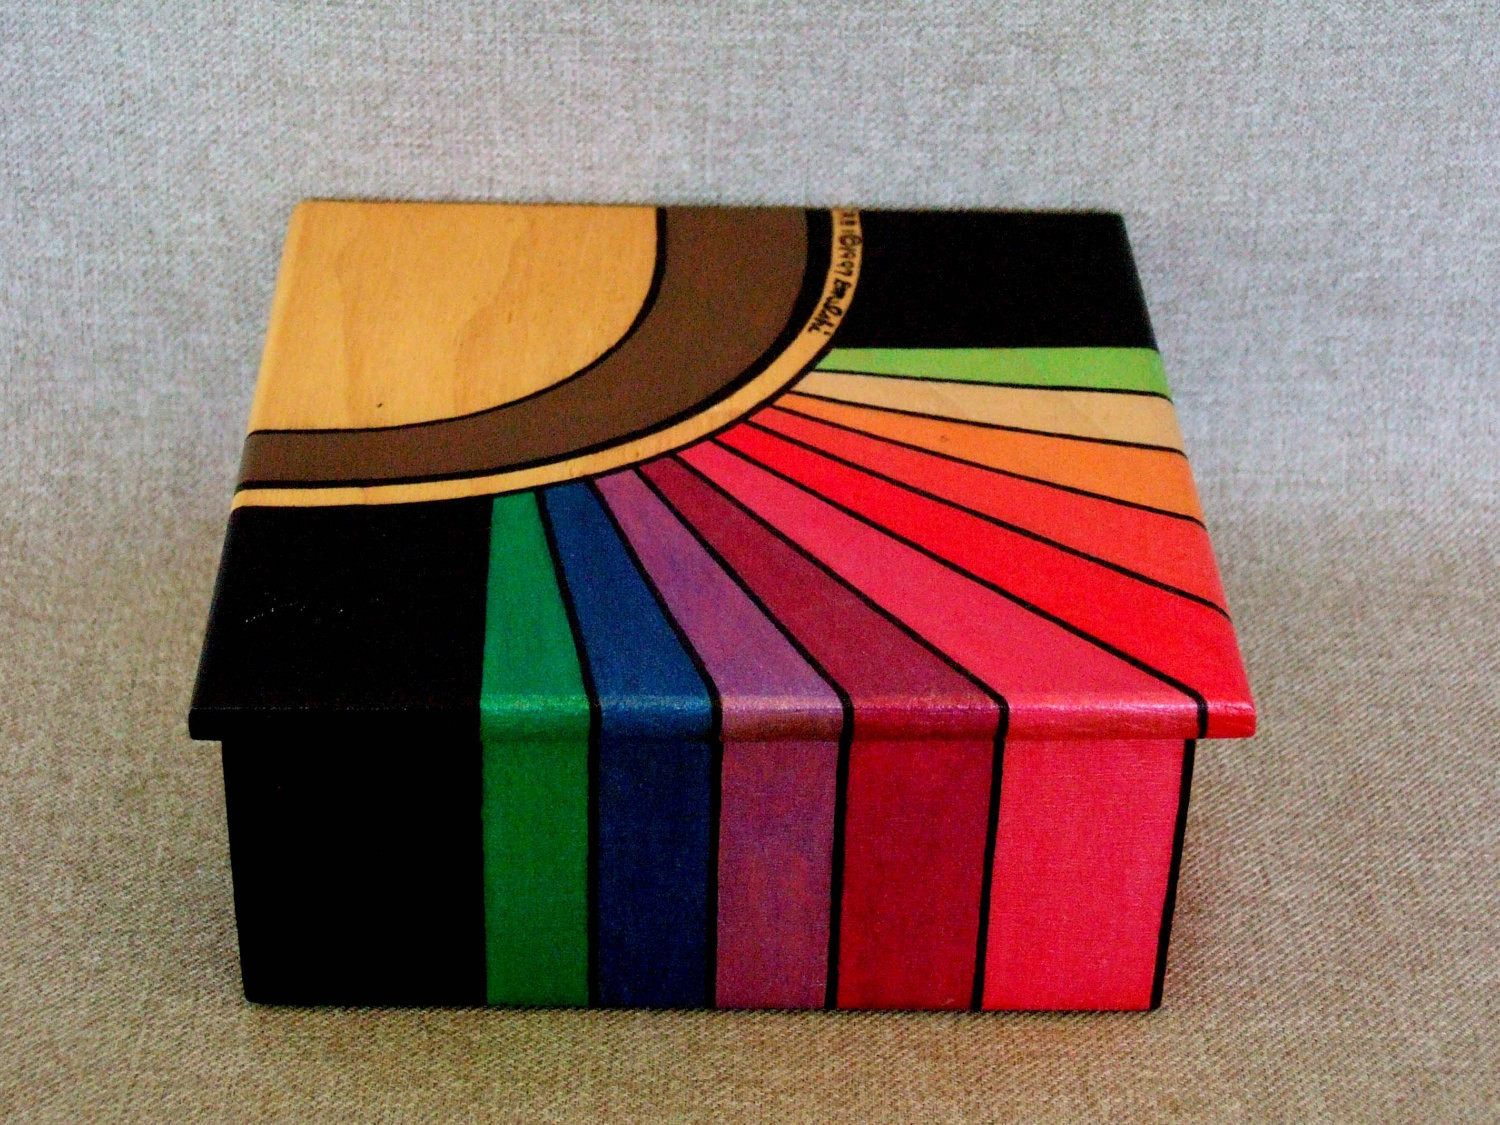 Wood Box Painting Ideas
 Painted Box for Keepsakes & Jewelry Abstract Rainbow Design